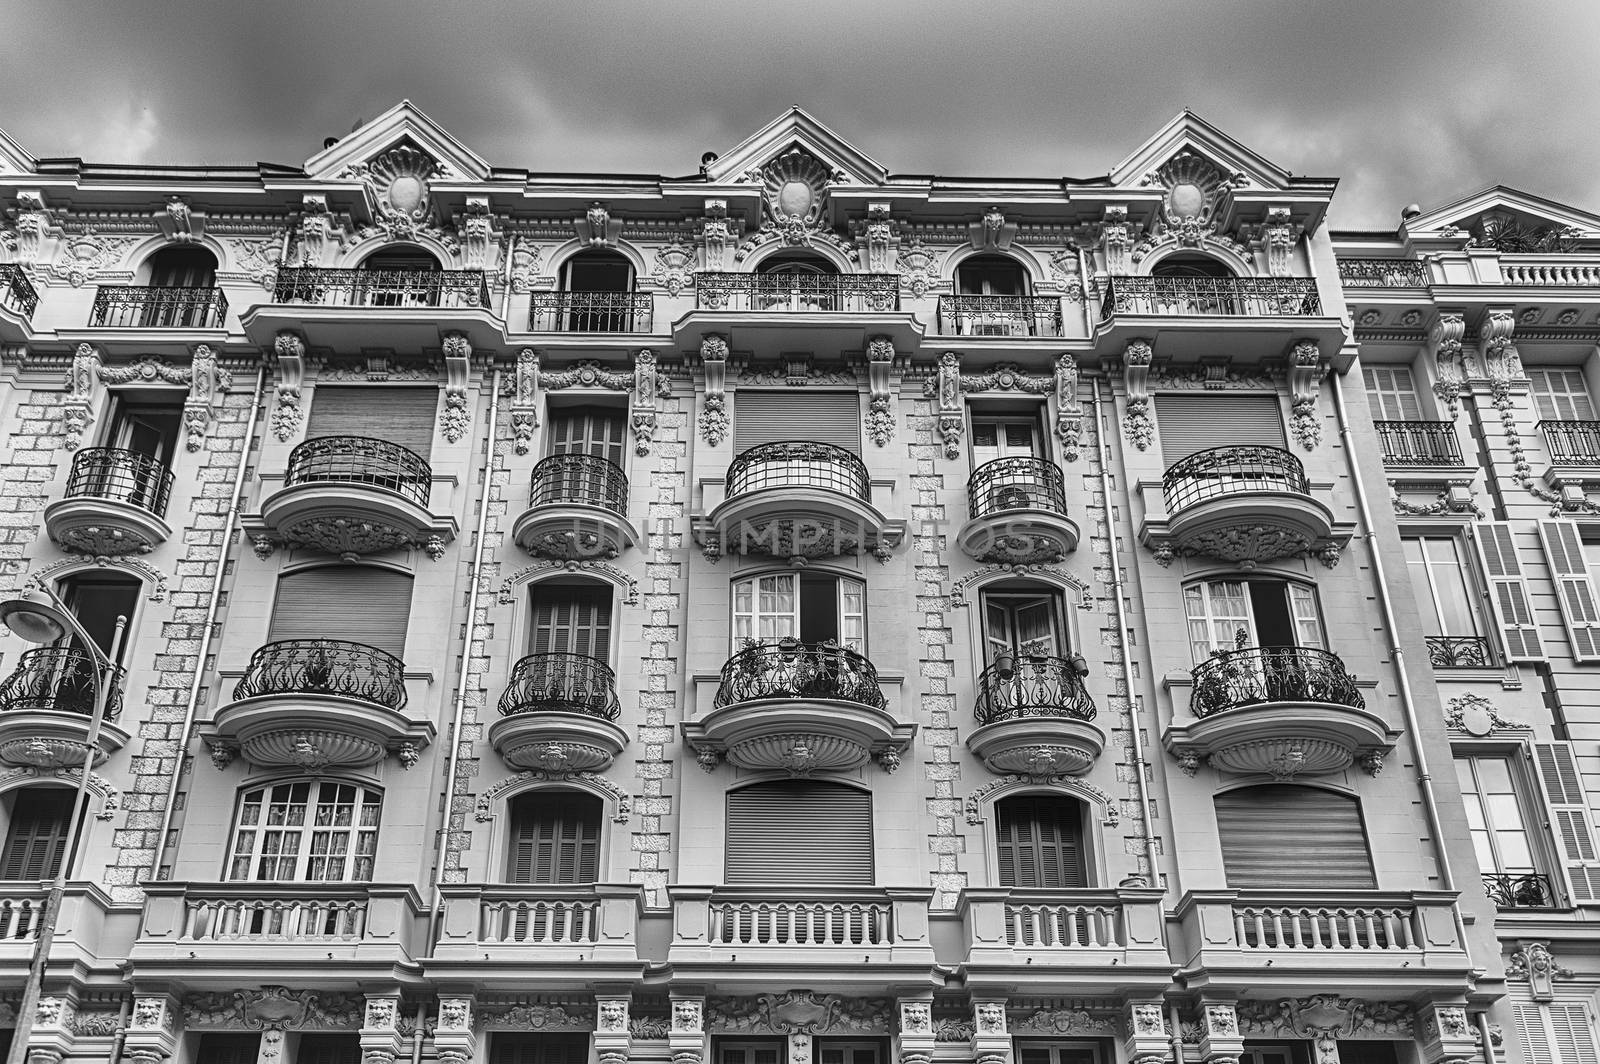 Beautiful architecture of the buildings in Avenue Georges Clemenceau, central Nice, Cote d'Azur, France